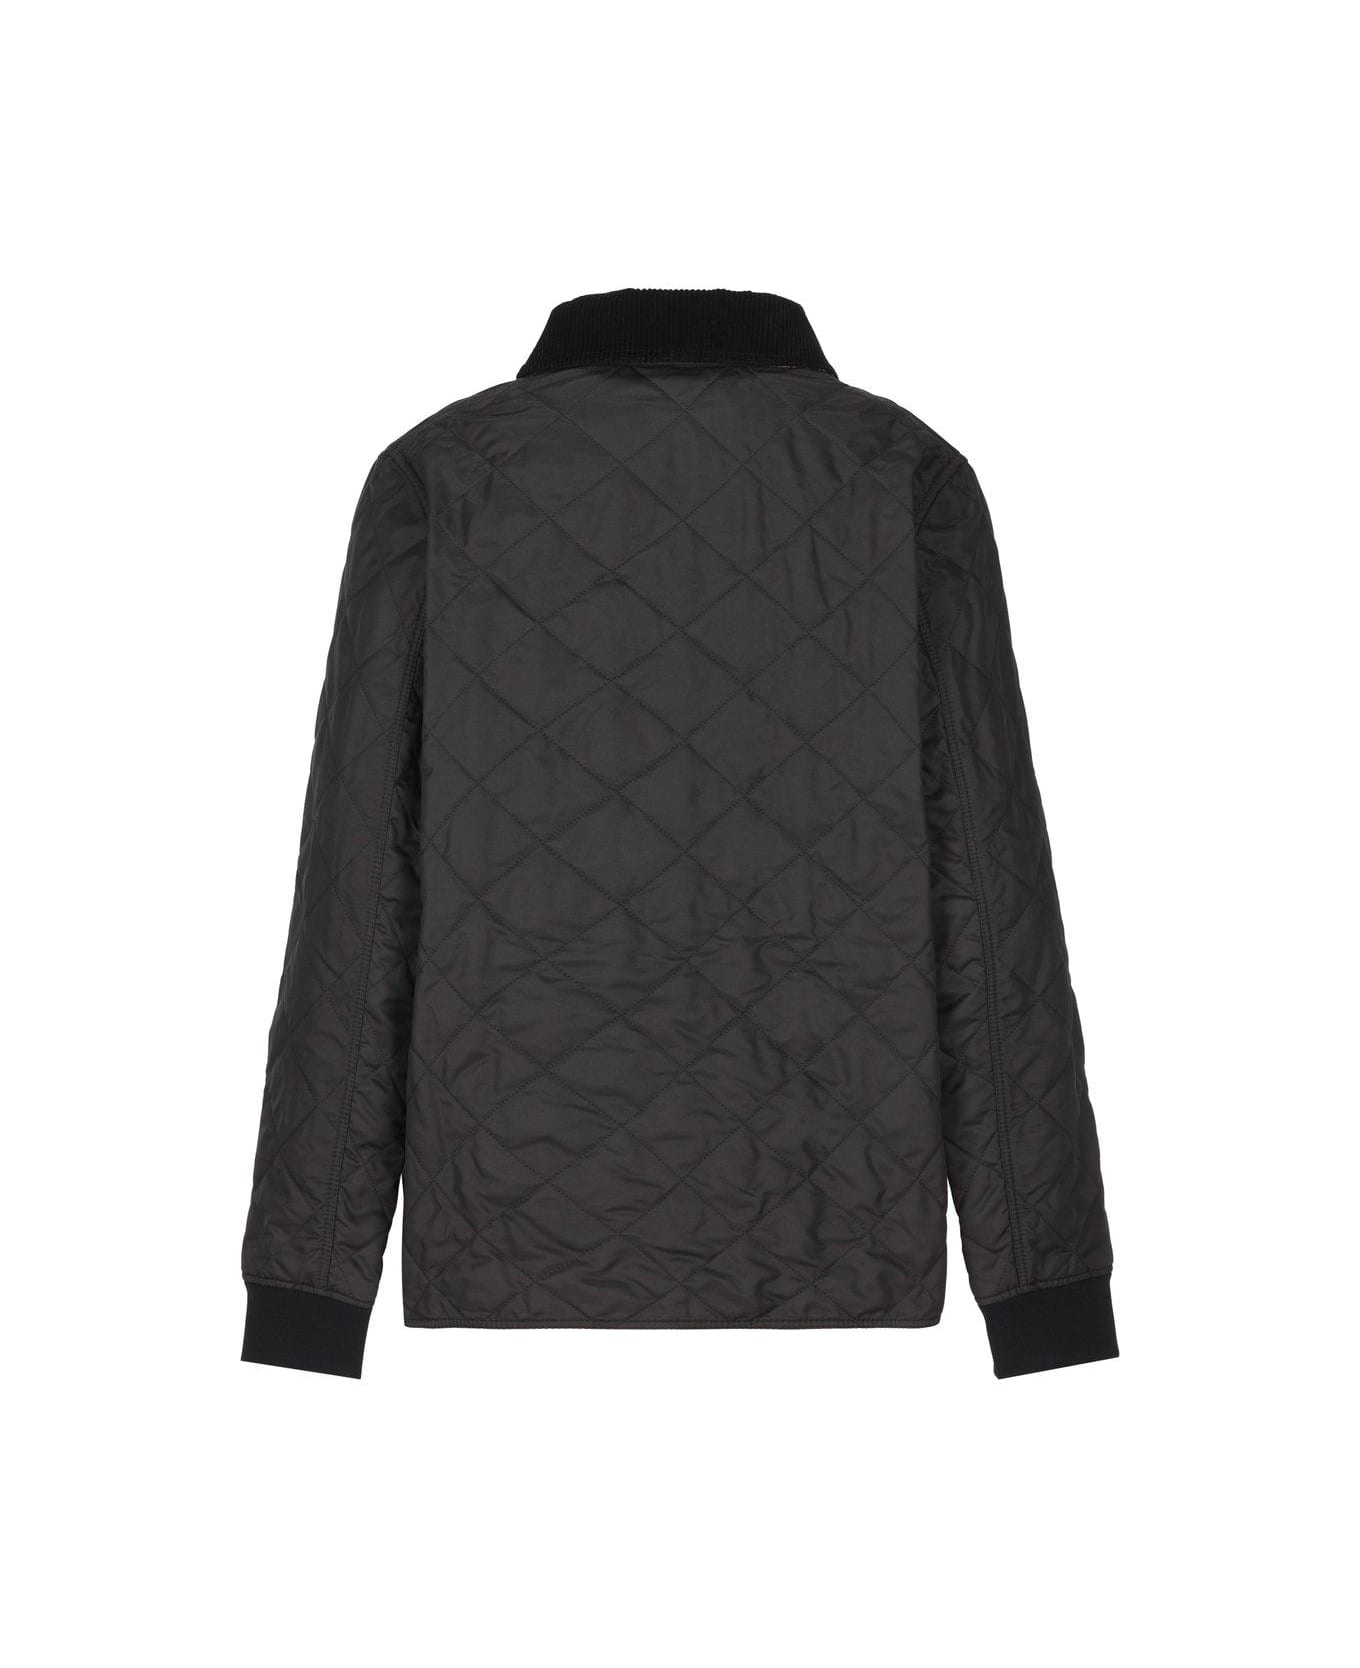 Burberry Diamond Quilted Zipped Jacket - Black